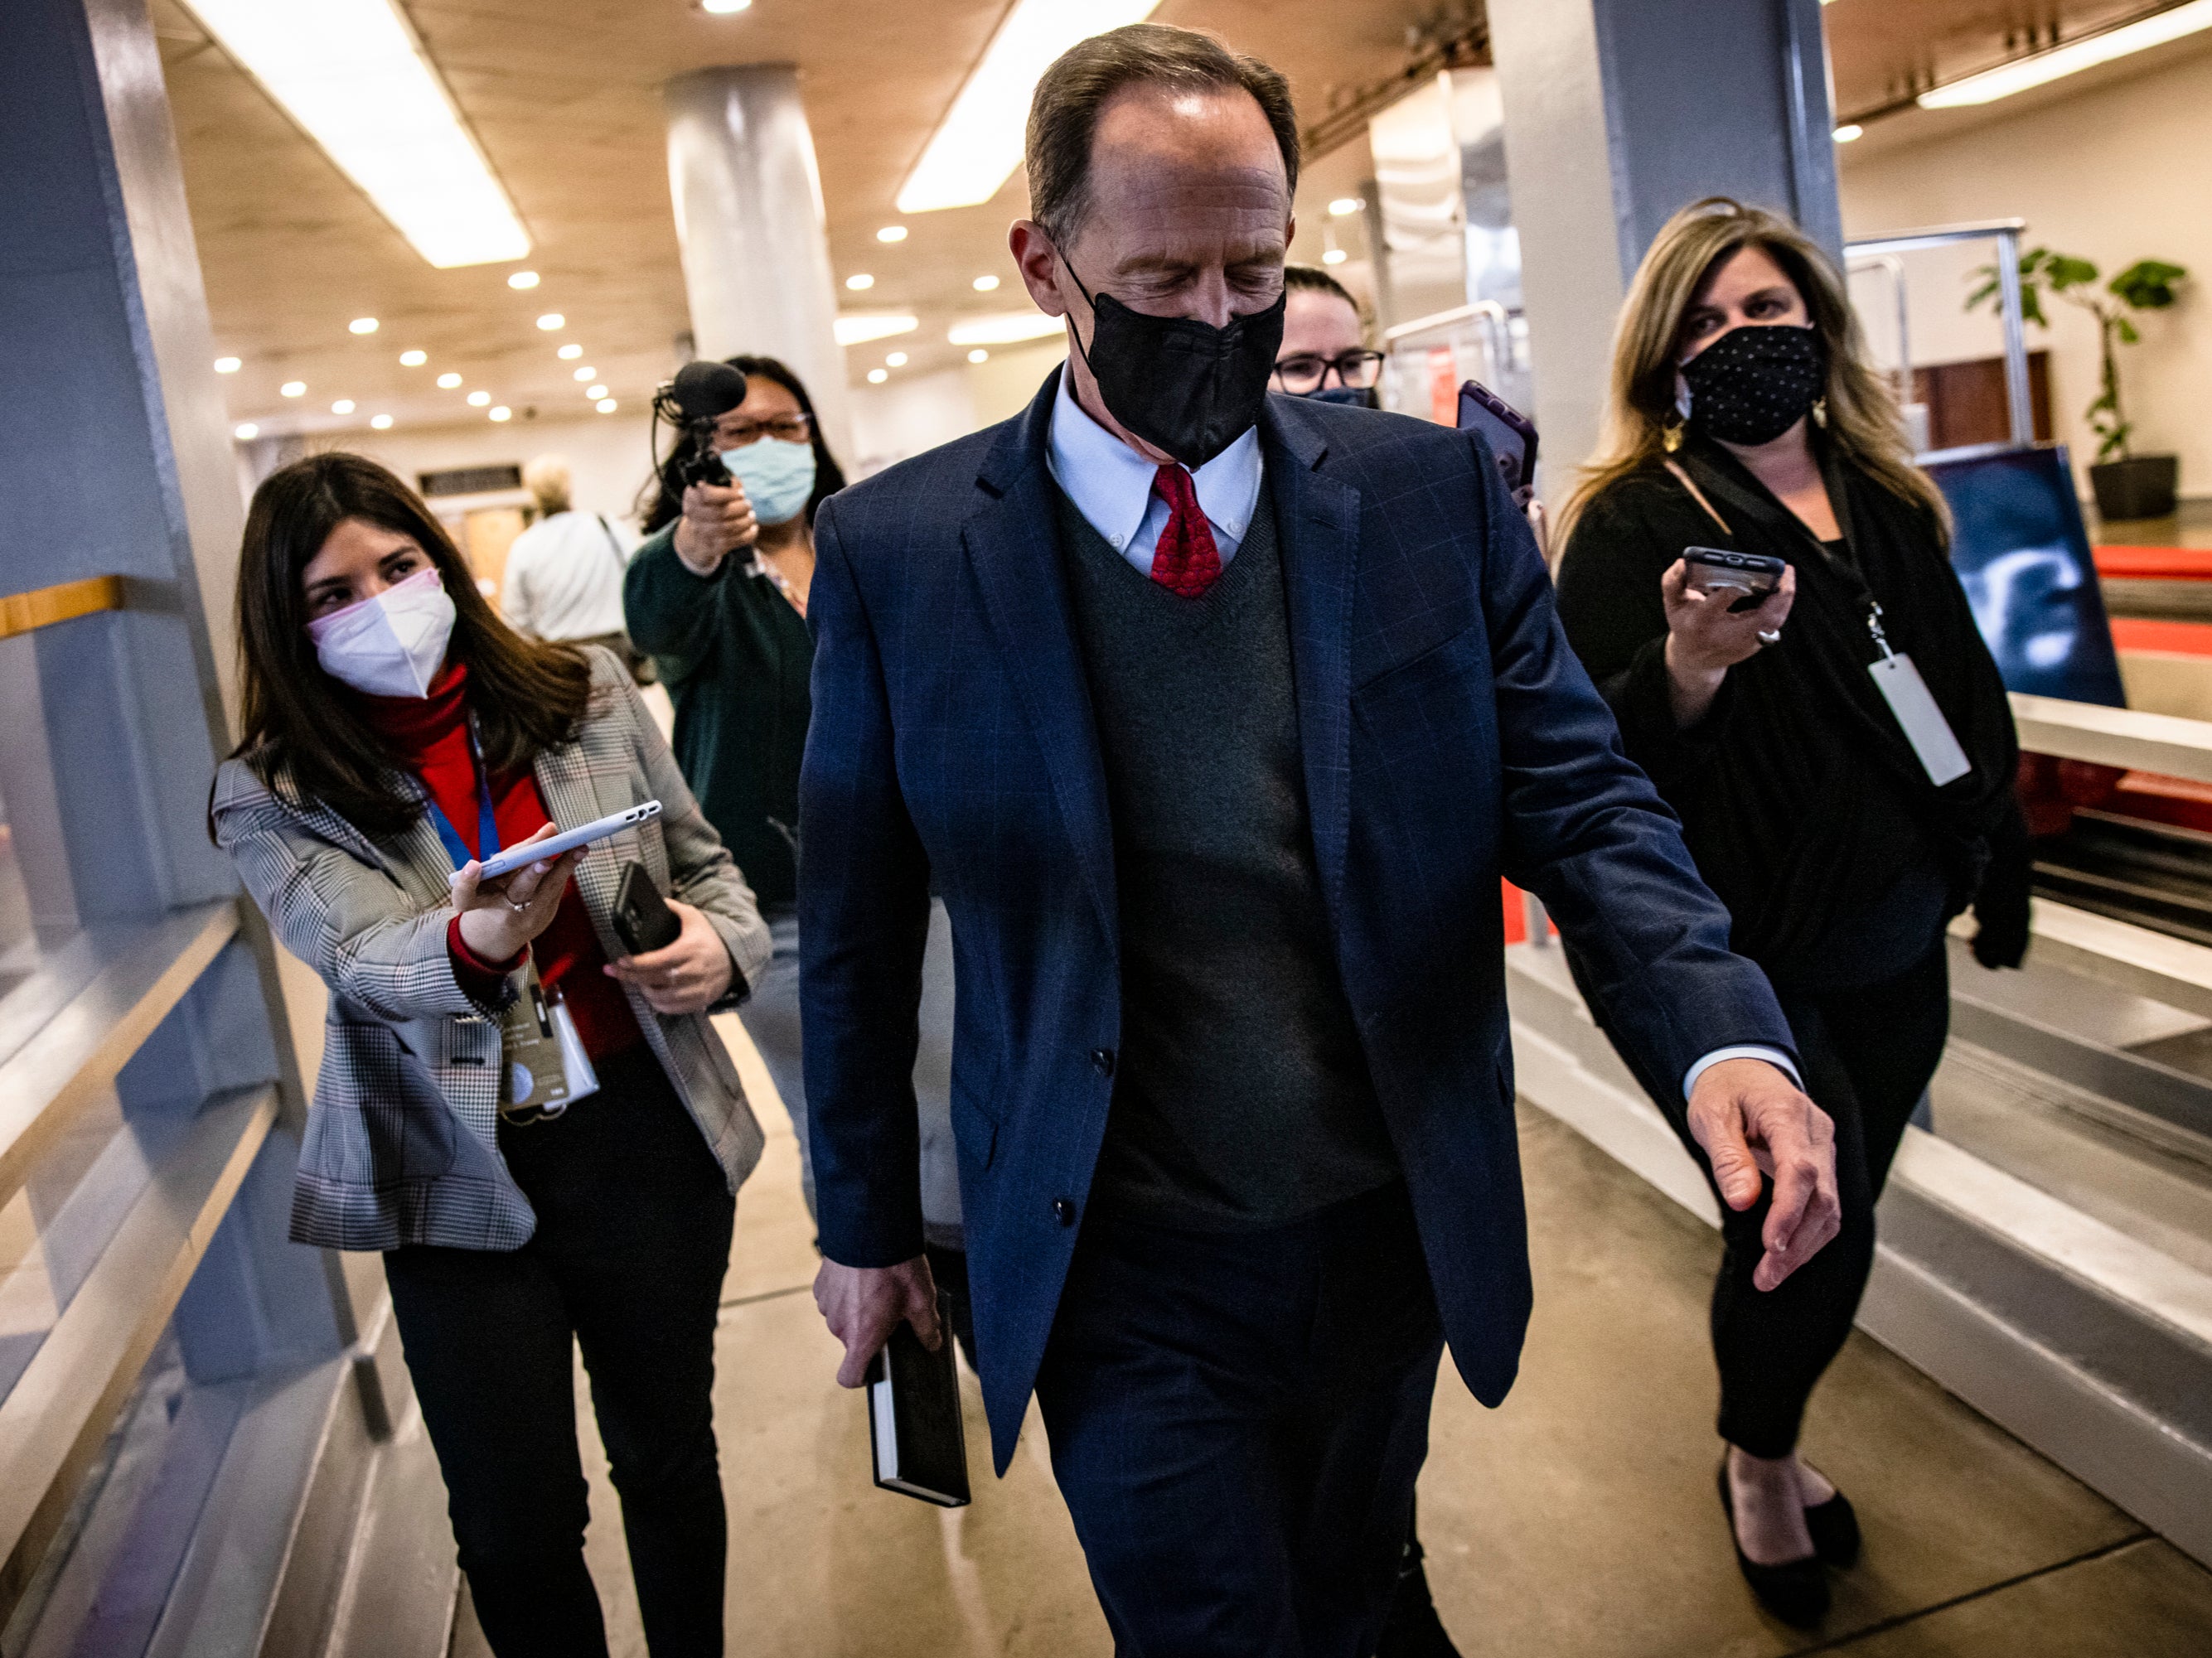 Senator Pat Toomey (R-PA) walks through the Senate subway at the conclusion of former President Donald Trump's second impeachment trial February 13, 2021 in Washington, DC